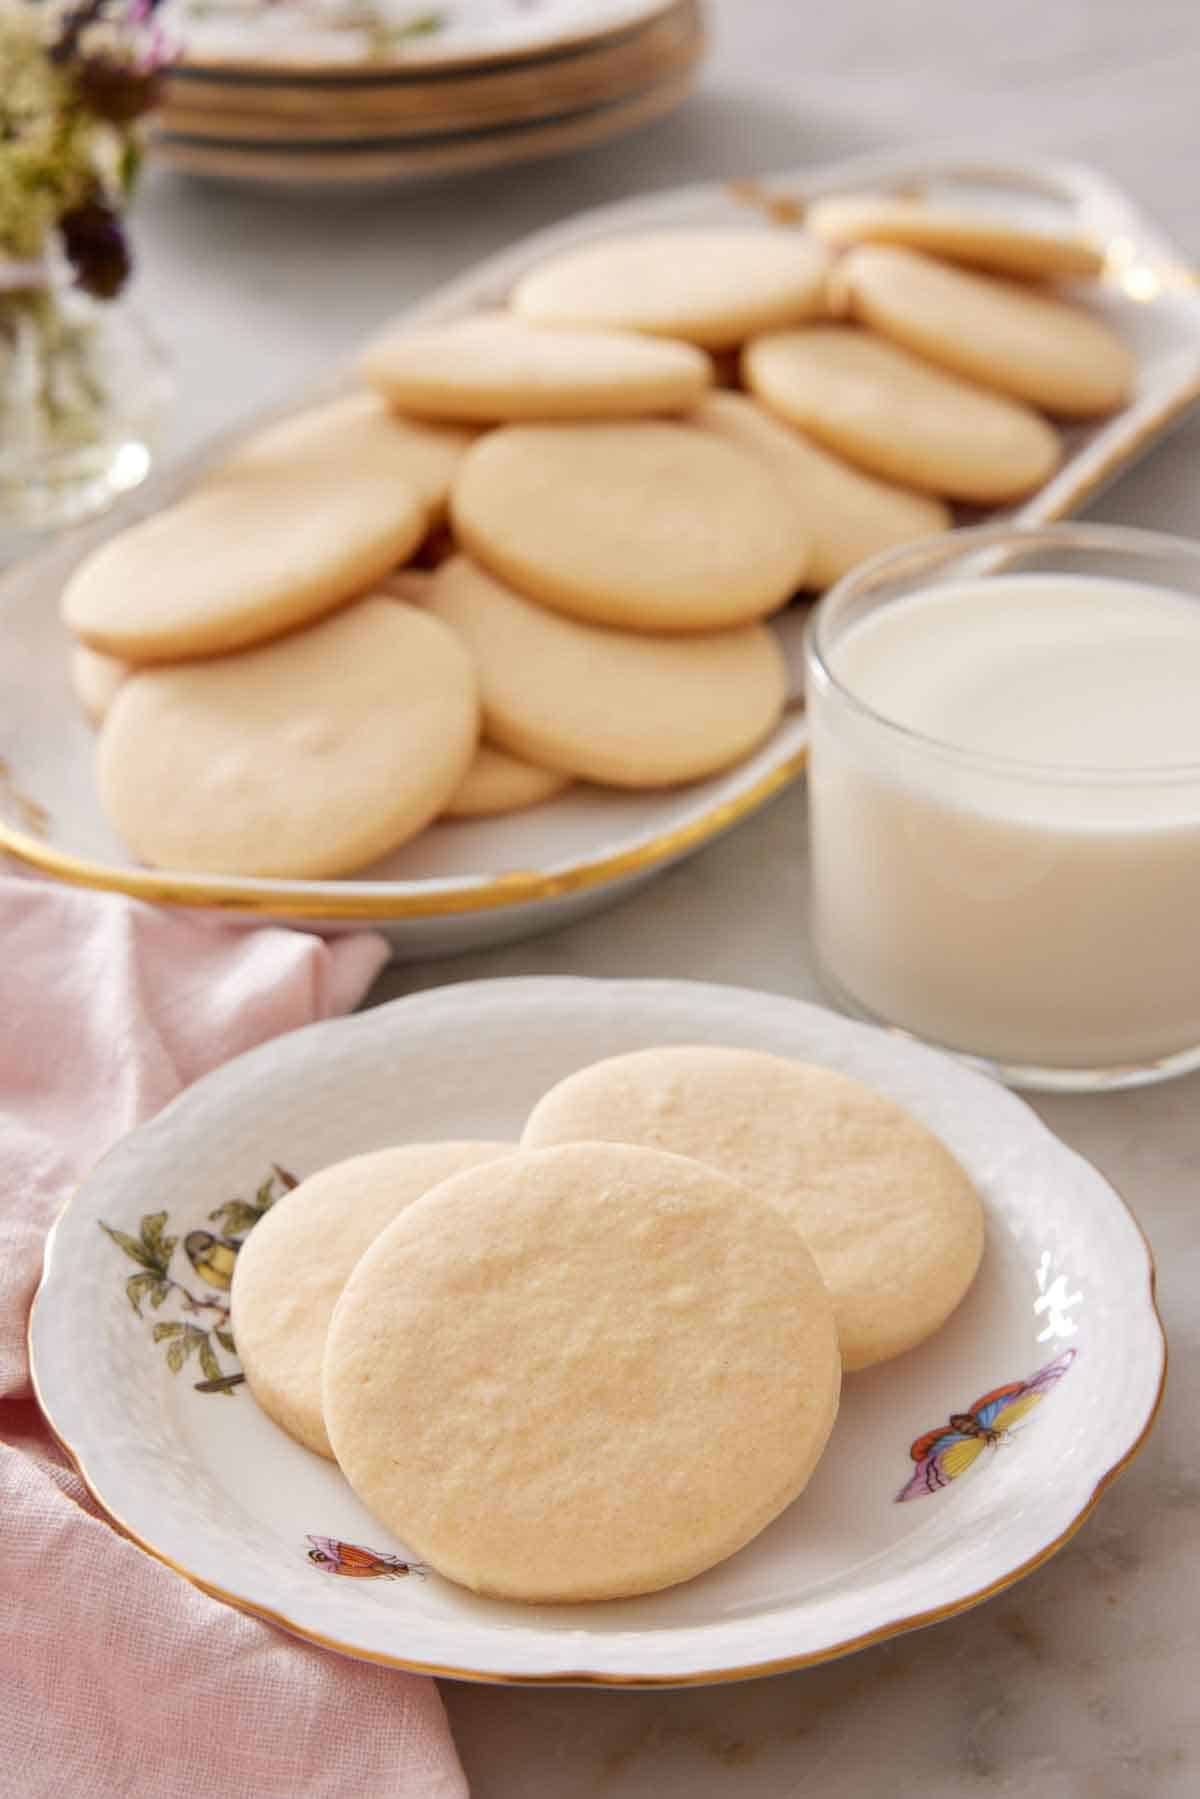 A plate with three sugar cookies with a glass of milk and additional cookies on a platter in the background.